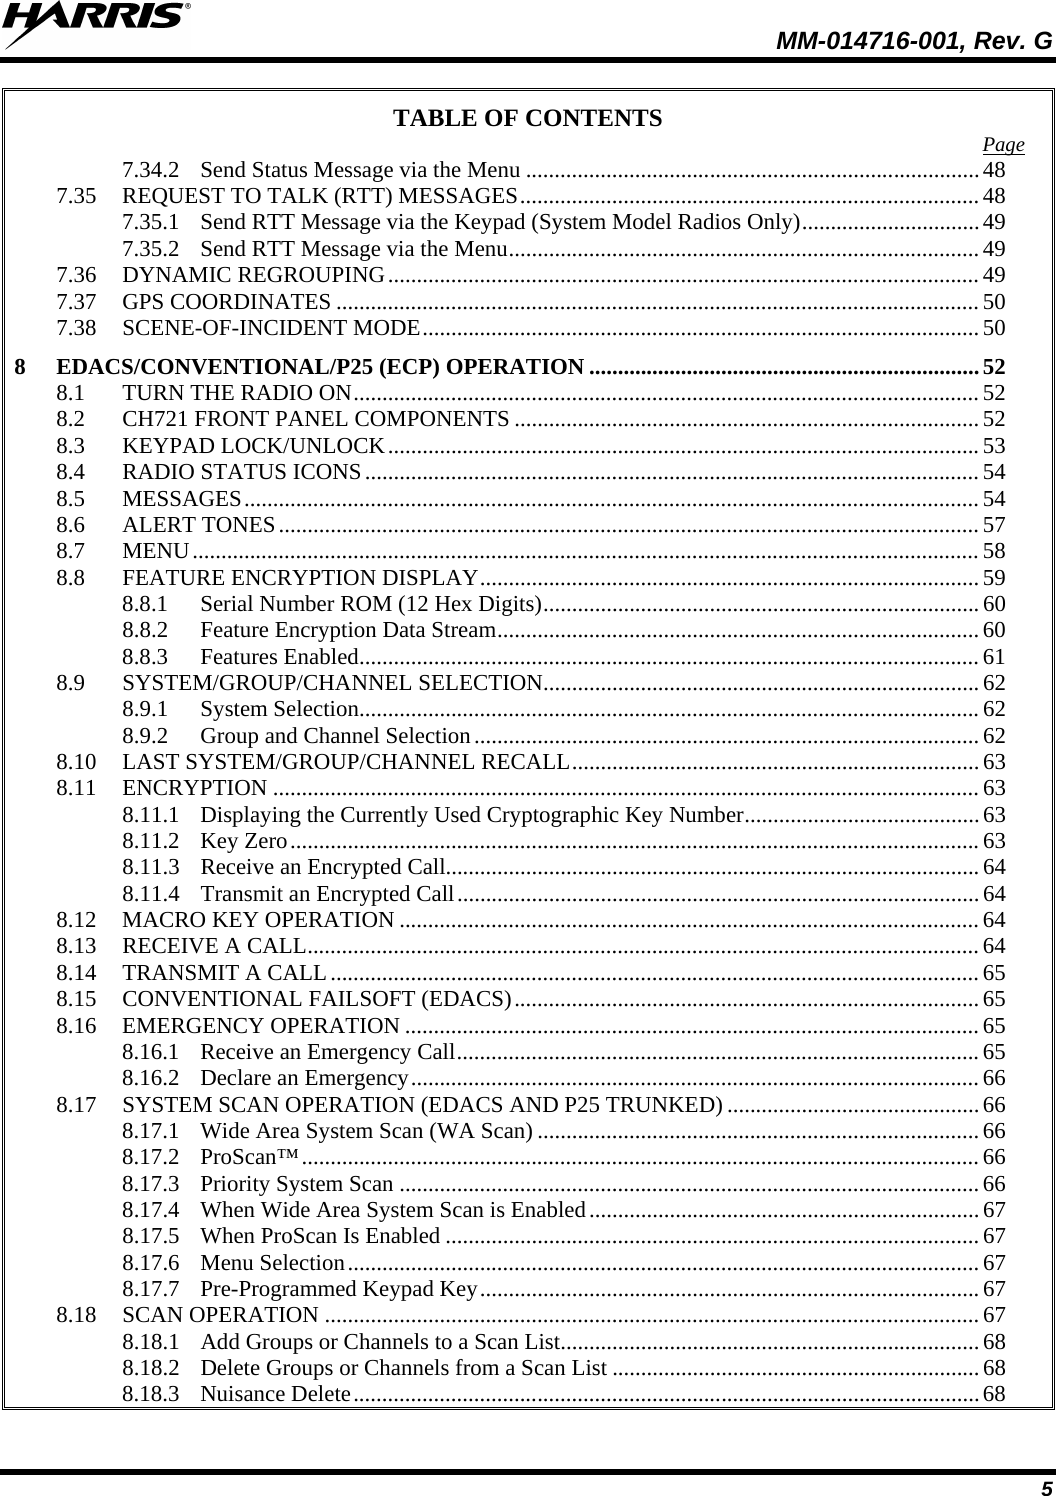  MM-014716-001, Rev. G 5 TABLE OF CONTENTS 7.34.2 Send Status Message via the Menu ............................................................................... 48Page  7.35 REQUEST TO TALK (RTT) MESSAGES ................................................................................ 48 7.35.1 Send RTT Message via the Keypad (System Model Radios Only) ............................... 49 7.35.2 Send RTT Message via the Menu .................................................................................. 49 7.36 DYNAMIC REGROUPING ....................................................................................................... 49 7.37 GPS COORDINATES ................................................................................................................ 50 7.38 SCENE-OF-INCIDENT MODE ................................................................................................. 50 8 EDACS/CONVENTIONAL/P25 (ECP) OPERATION .................................................................... 52 8.1 TURN THE RADIO ON ............................................................................................................. 52 8.2 CH721 FRONT PANEL COMPONENTS ................................................................................. 52 8.3 KEYPAD LOCK/UNLOCK ....................................................................................................... 53 8.4 RADIO STATUS ICONS ........................................................................................................... 54 8.5 MESSAGES ................................................................................................................................ 54 8.6 ALERT TONES .......................................................................................................................... 57 8.7 MENU ......................................................................................................................................... 58 8.8 FEATURE ENCRYPTION DISPLAY ....................................................................................... 59 8.8.1 Serial Number ROM (12 Hex Digits) ............................................................................ 60 8.8.2 Feature Encryption Data Stream .................................................................................... 60 8.8.3 Features Enabled ............................................................................................................ 61 8.9 SYSTEM/GROUP/CHANNEL SELECTION............................................................................ 62 8.9.1 System Selection ............................................................................................................ 62 8.9.2 Group and Channel Selection ........................................................................................ 62 8.10 LAST SYSTEM/GROUP/CHANNEL RECALL ....................................................................... 63 8.11 ENCRYPTION ........................................................................................................................... 63 8.11.1 Displaying the Currently Used Cryptographic Key Number ......................................... 63 8.11.2 Key Zero ........................................................................................................................ 63 8.11.3 Receive an Encrypted Call............................................................................................. 64 8.11.4 Transmit an Encrypted Call ........................................................................................... 64 8.12 MACRO KEY OPERATION ..................................................................................................... 64 8.13 RECEIVE A CALL ..................................................................................................................... 64 8.14 TRANSMIT A CALL ................................................................................................................. 65 8.15 CONVENTIONAL FAILSOFT (EDACS) ................................................................................. 65 8.16 EMERGENCY OPERATION .................................................................................................... 65 8.16.1 Receive an Emergency Call ........................................................................................... 65 8.16.2 Declare an Emergency ................................................................................................... 66 8.17 SYSTEM SCAN OPERATION (EDACS AND P25 TRUNKED) ............................................ 66 8.17.1 Wide Area System Scan (WA Scan) ............................................................................. 66 8.17.2 ProScan™ ...................................................................................................................... 66 8.17.3 Priority System Scan ..................................................................................................... 66 8.17.4 When Wide Area System Scan is Enabled .................................................................... 67 8.17.5 When ProScan Is Enabled ............................................................................................. 67 8.17.6 Menu Selection .............................................................................................................. 67 8.17.7 Pre-Programmed Keypad Key ....................................................................................... 67 8.18 SCAN OPERATION .................................................................................................................. 67 8.18.1 Add Groups or Channels to a Scan List ......................................................................... 68 8.18.2 Delete Groups or Channels from a Scan List ................................................................ 68 8.18.3 Nuisance Delete ............................................................................................................. 68 